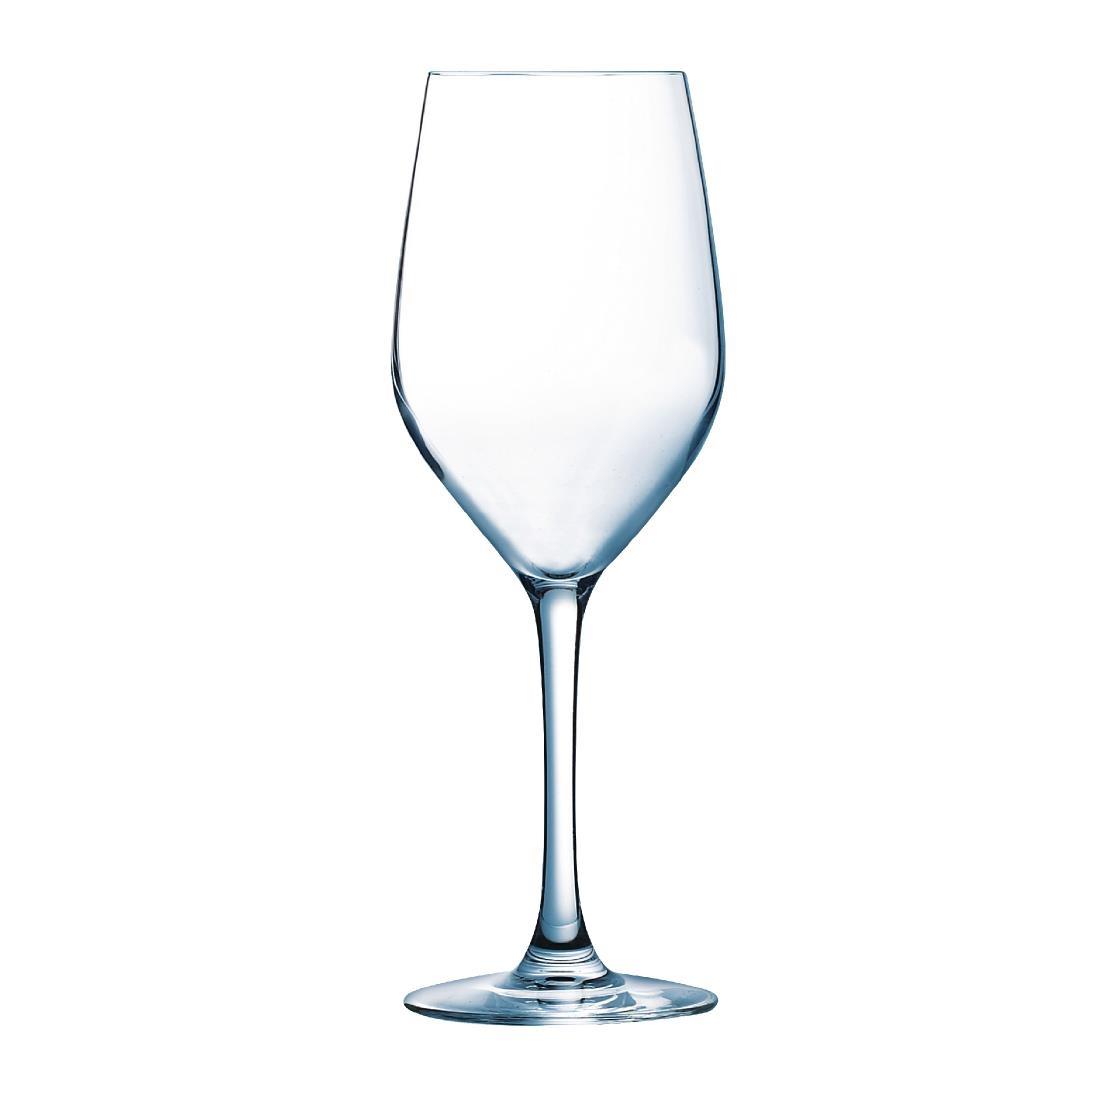 Arcoroc Mineral Wine Glasses 270ml (Pack of 24) - GD964  - 1